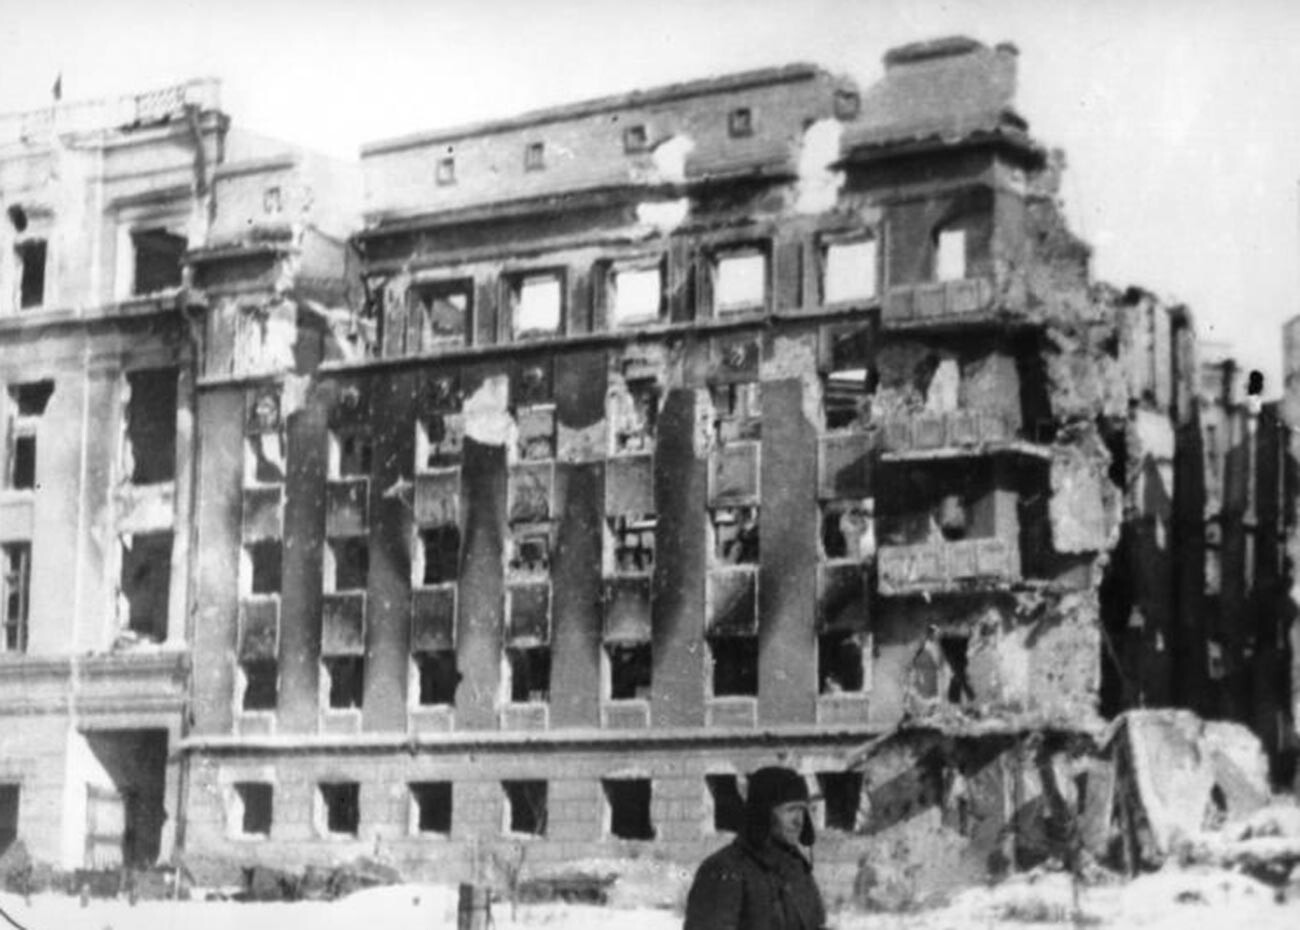 The department store building in Stalingrad.